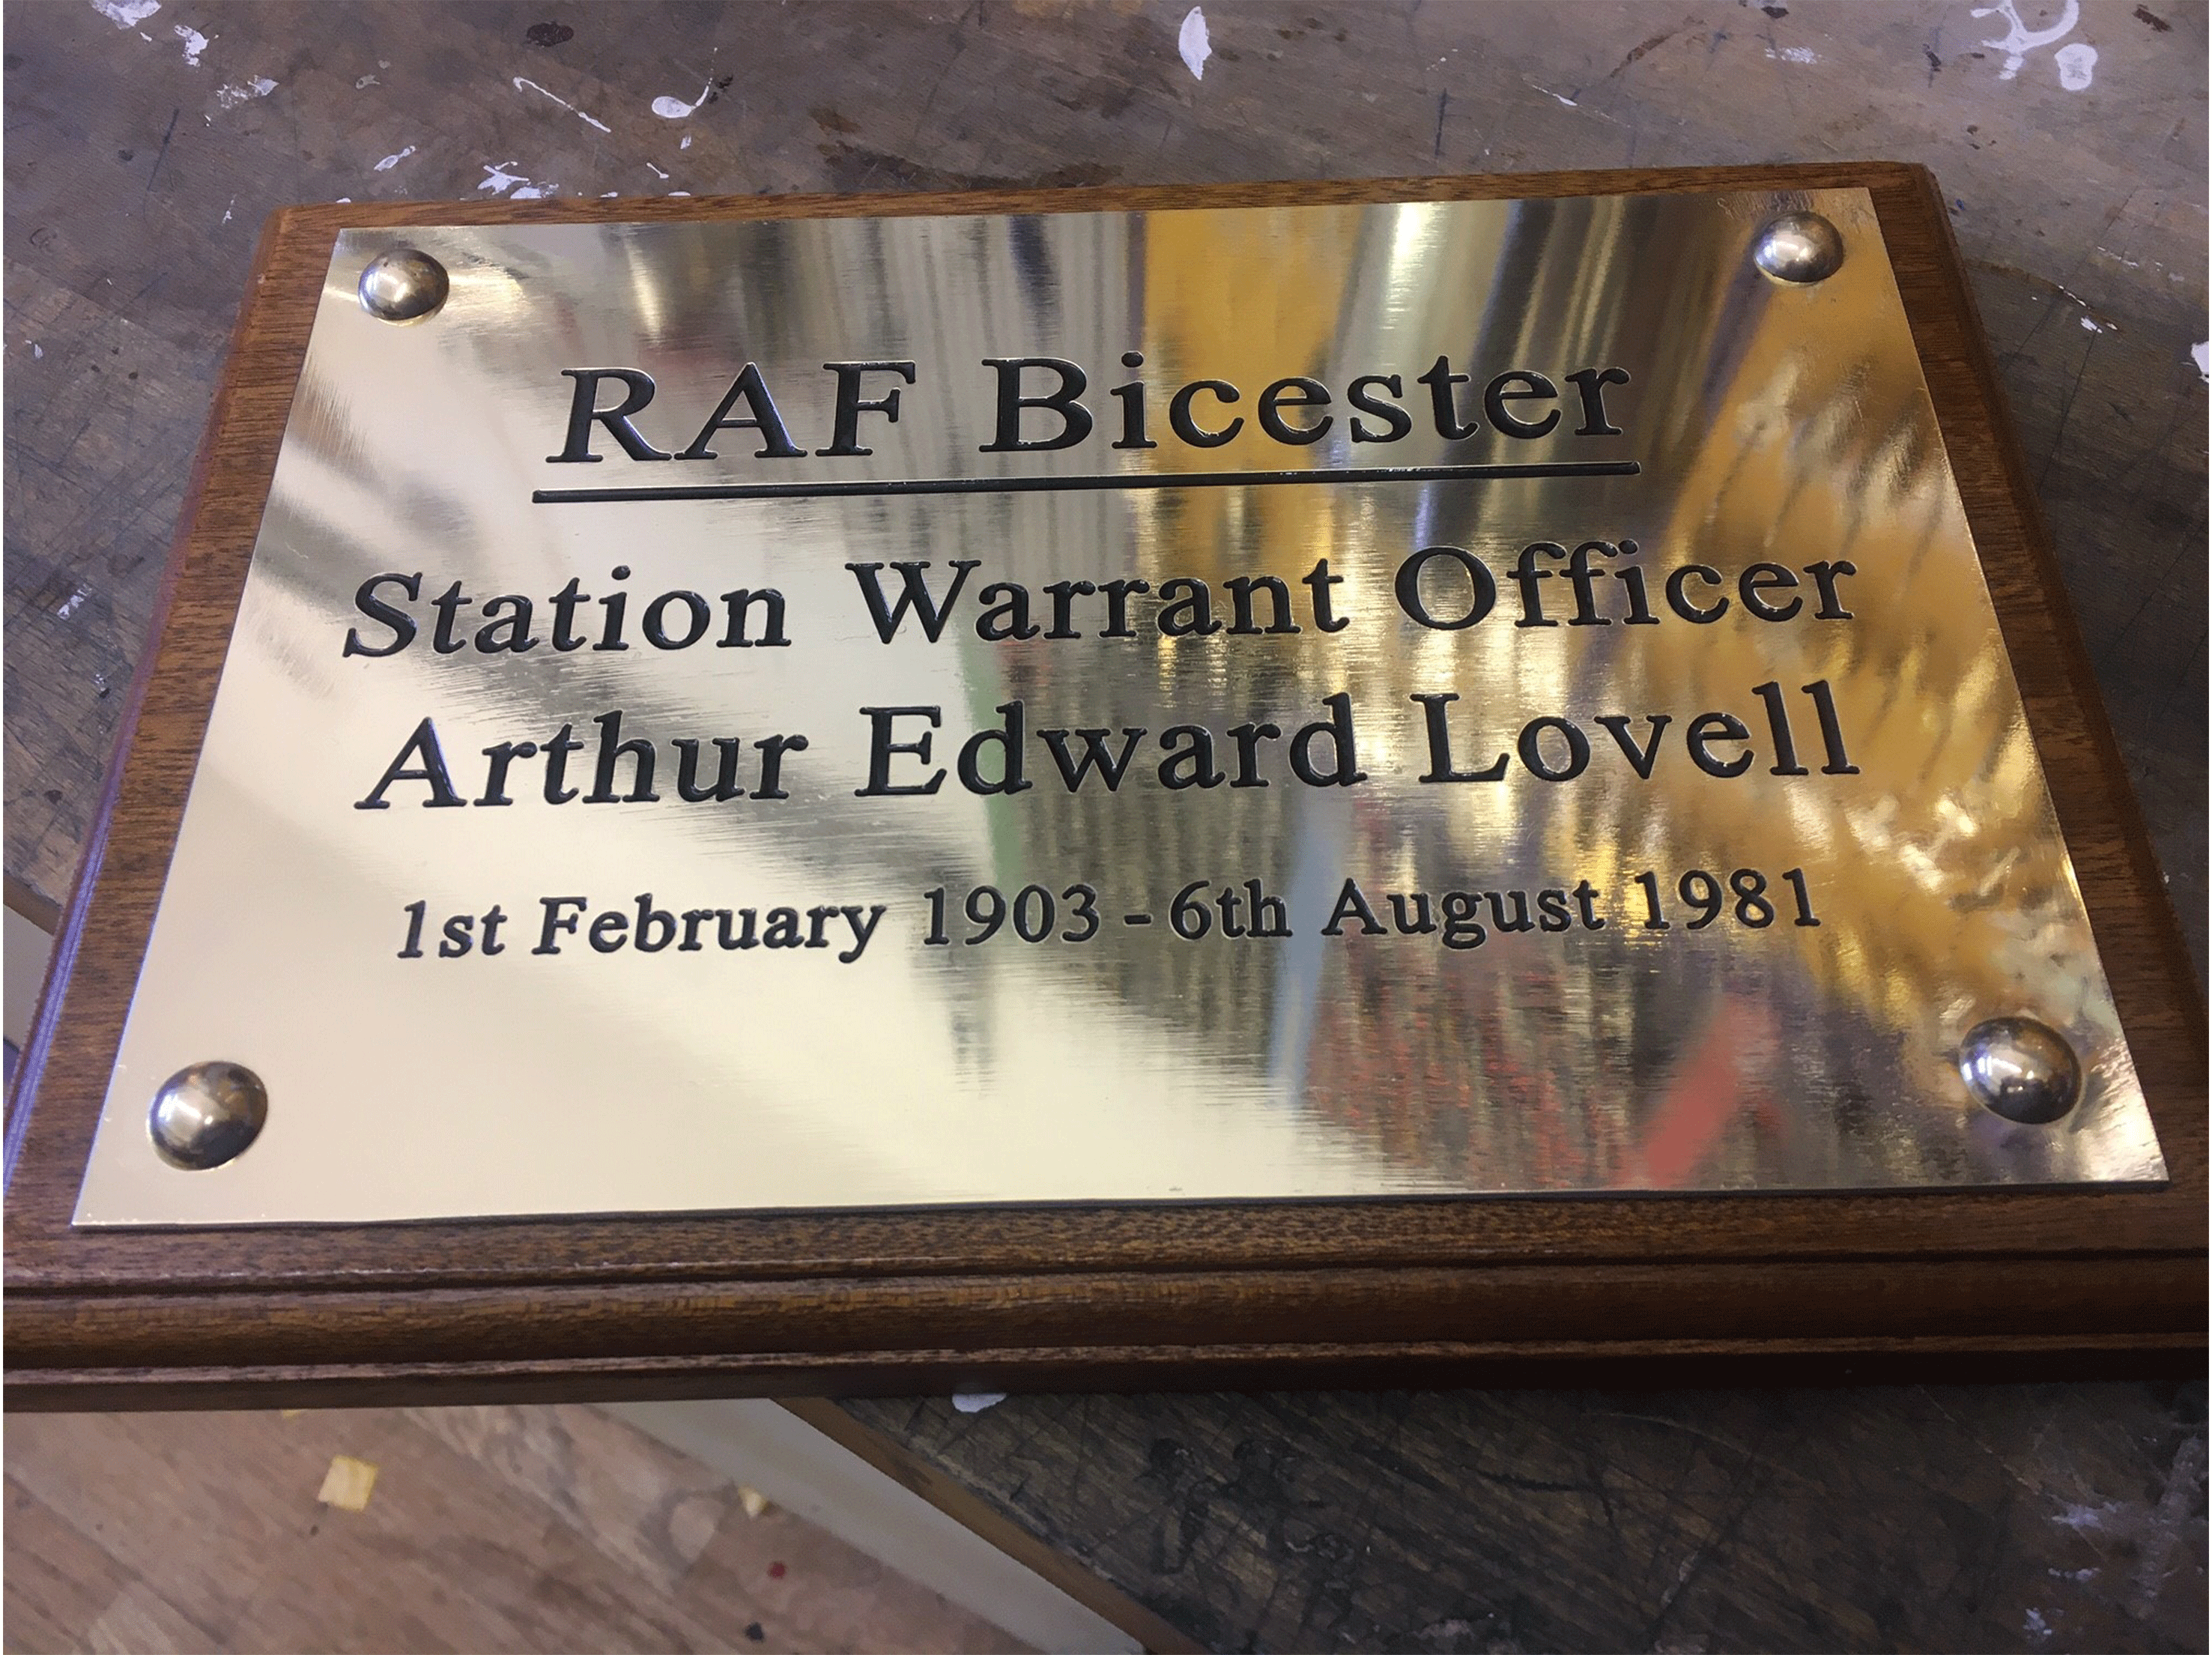 brass tribute plaque on mahogany backing board #rafbicester #royalairforce